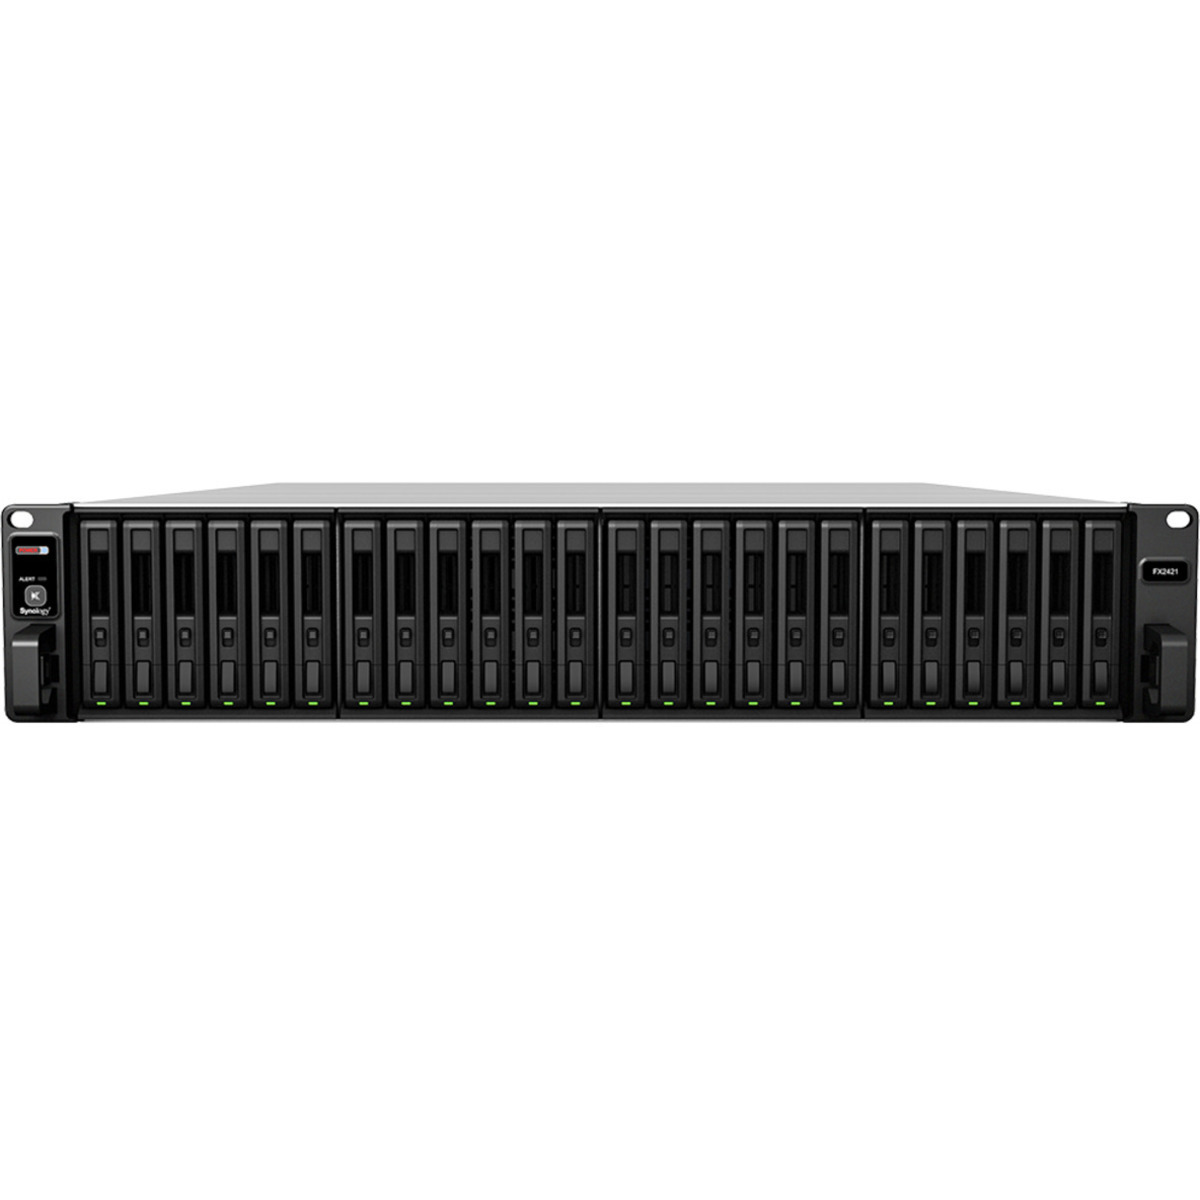 Synology FX2421 External Expansion Drive 46tb 24-Bay RackMount Large Business / Enterprise Expansion Enclosure 23x2tb Western Digital Red SA500 WDS200T1R0A 2.5 560/530MB/s SATA 6Gb/s SSD NAS Class Drives Installed - Burn-In Tested FX2421 External Expansion Drive